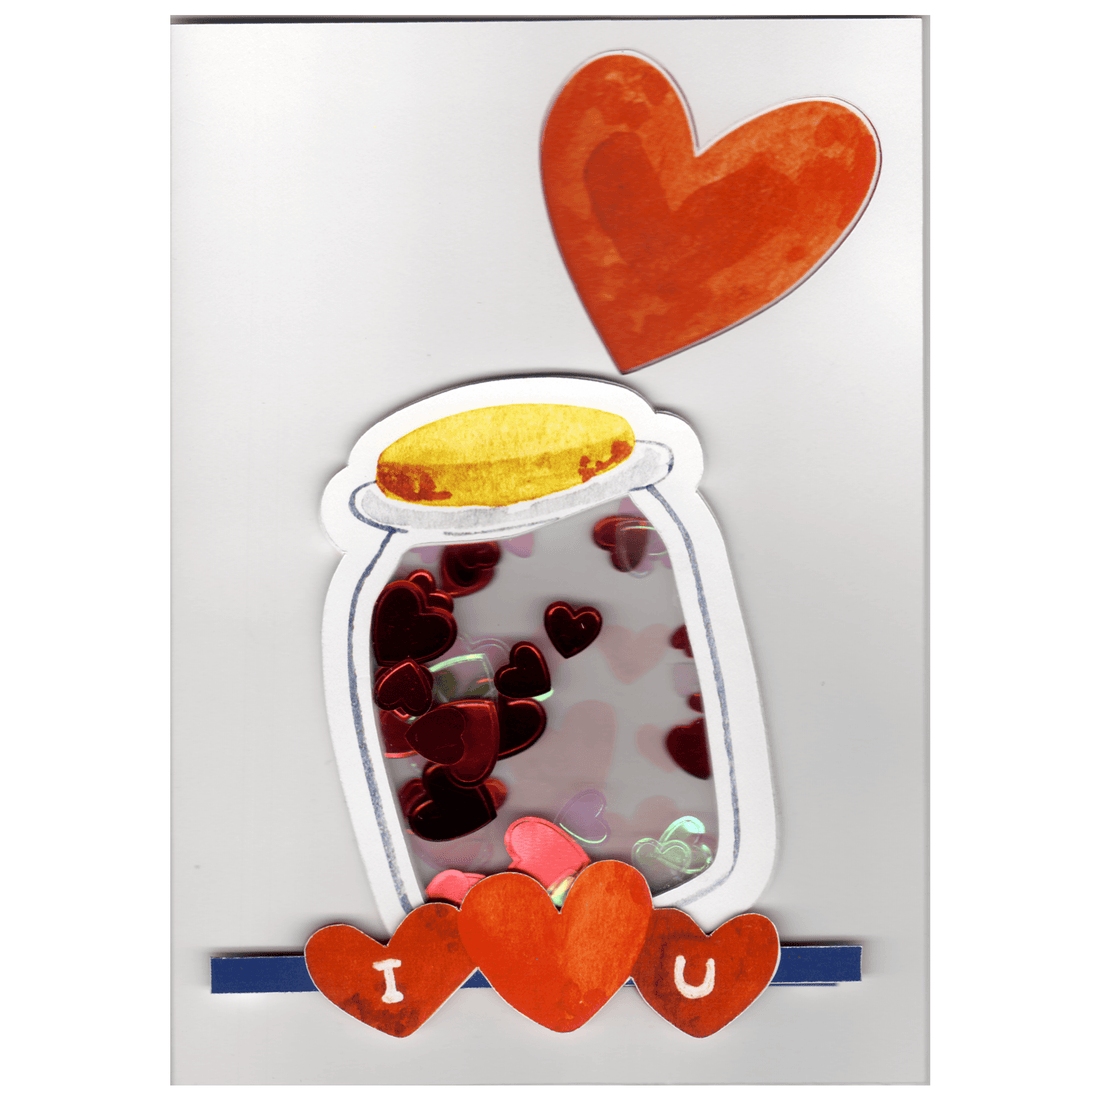 Card featuring a jar of hearts and and heart cutout in the top right hand corner on the outstside. The jar is created as a shaker window containing irridescent pearl and red hearts of various sizes.